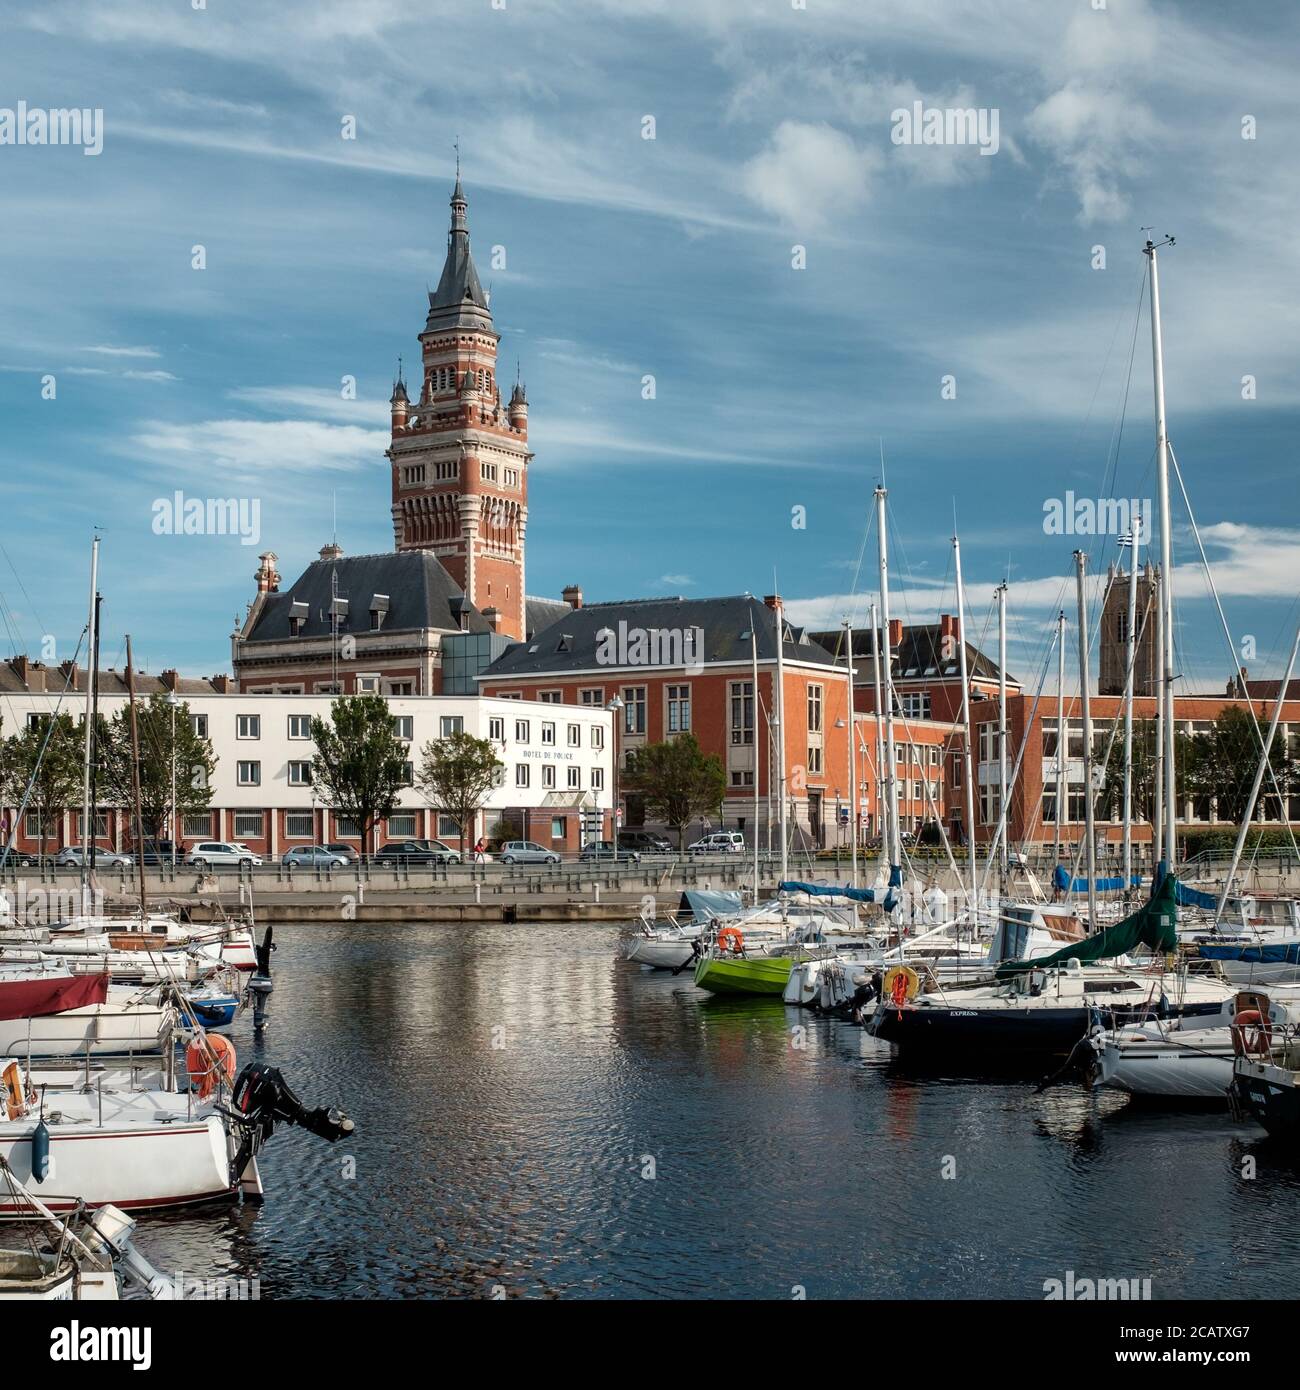 View on the town hall and bellfry from accross the marina called 'Bassin du Commerce' Stock Photo